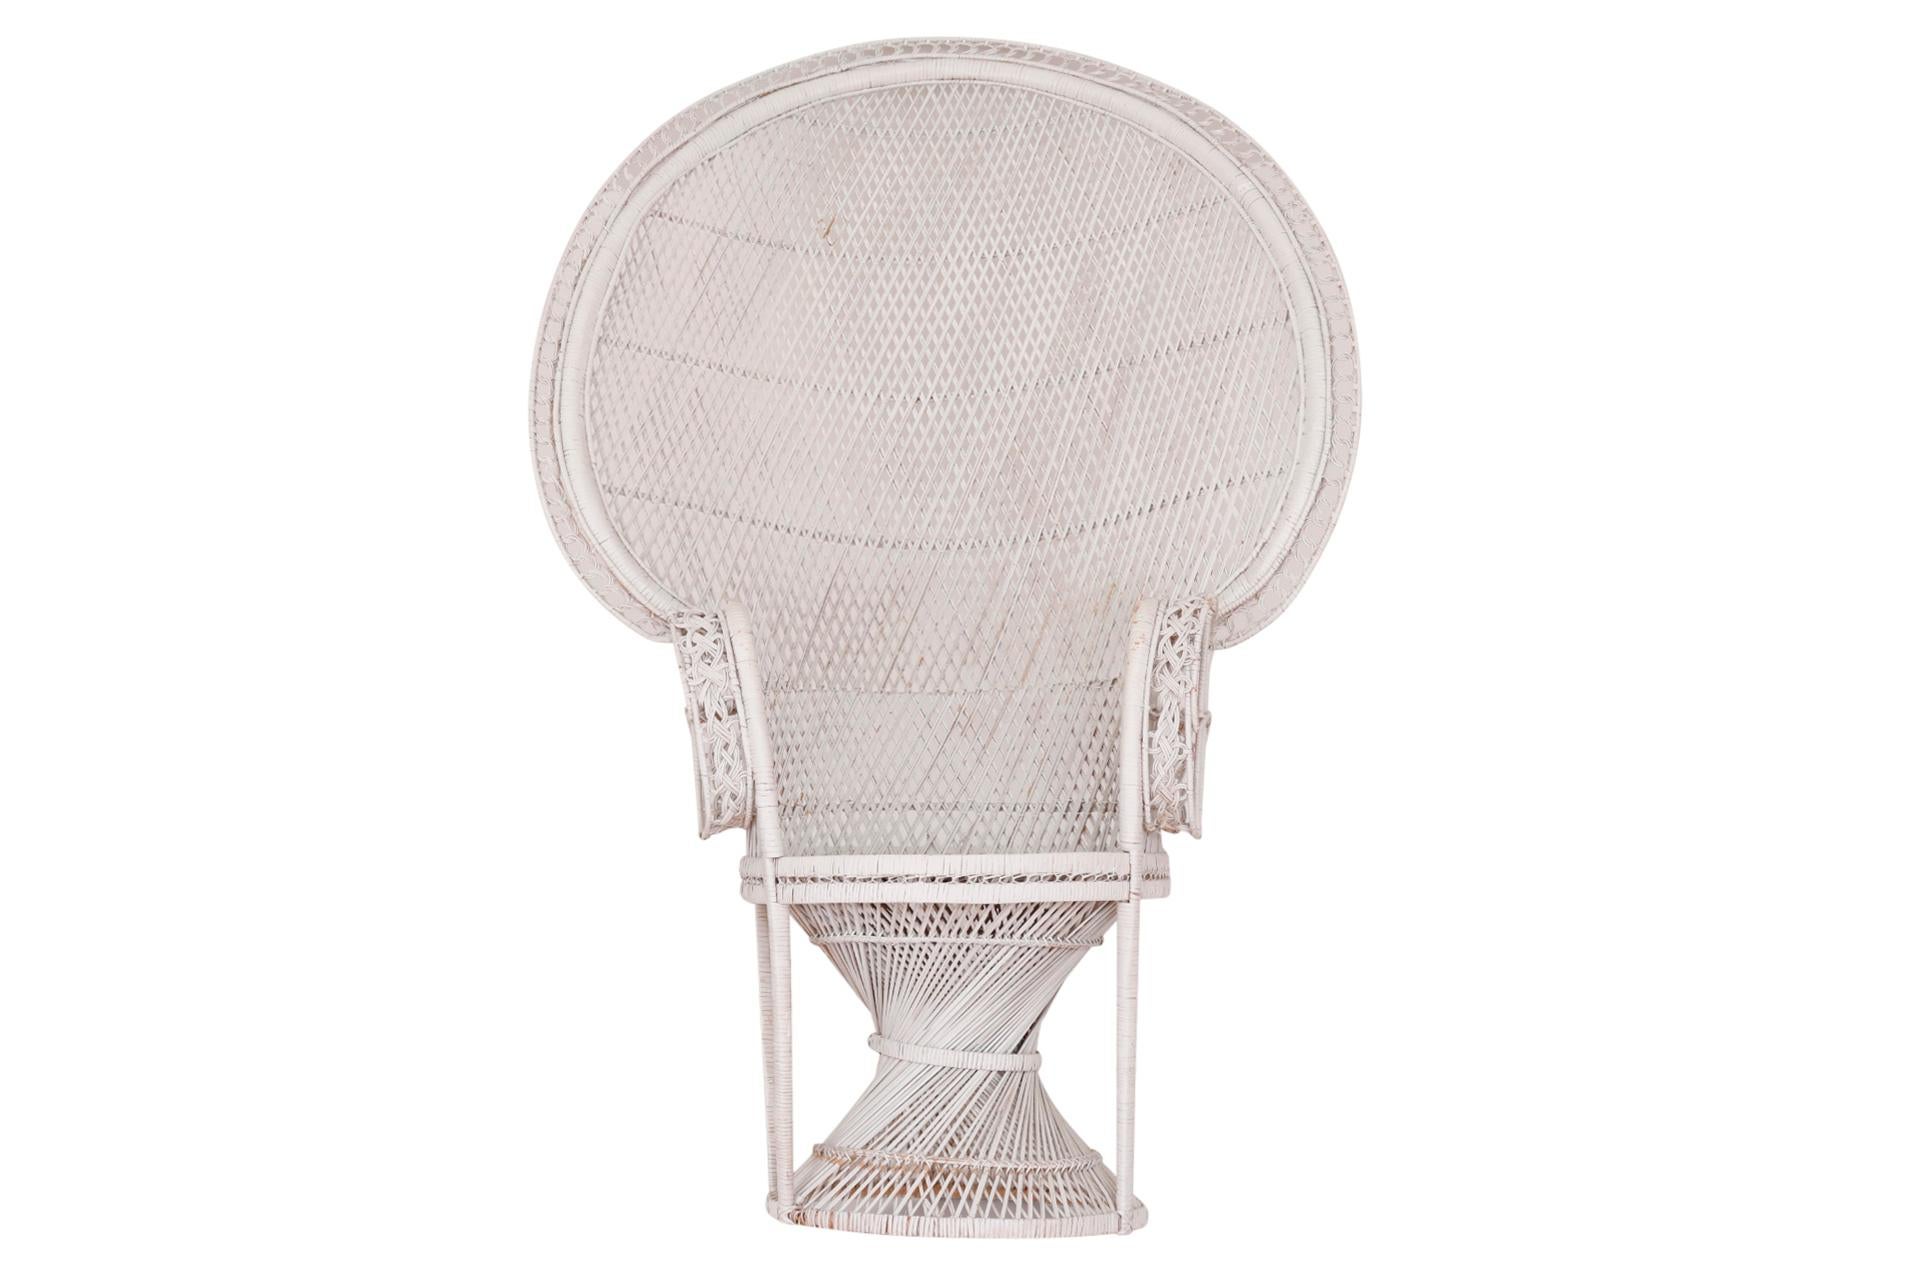 An iconic wicker peacock chair in white. A large fan back is decorated with a circular woven trim and scrolled arms are finished with plaited details. Arm height 27.25